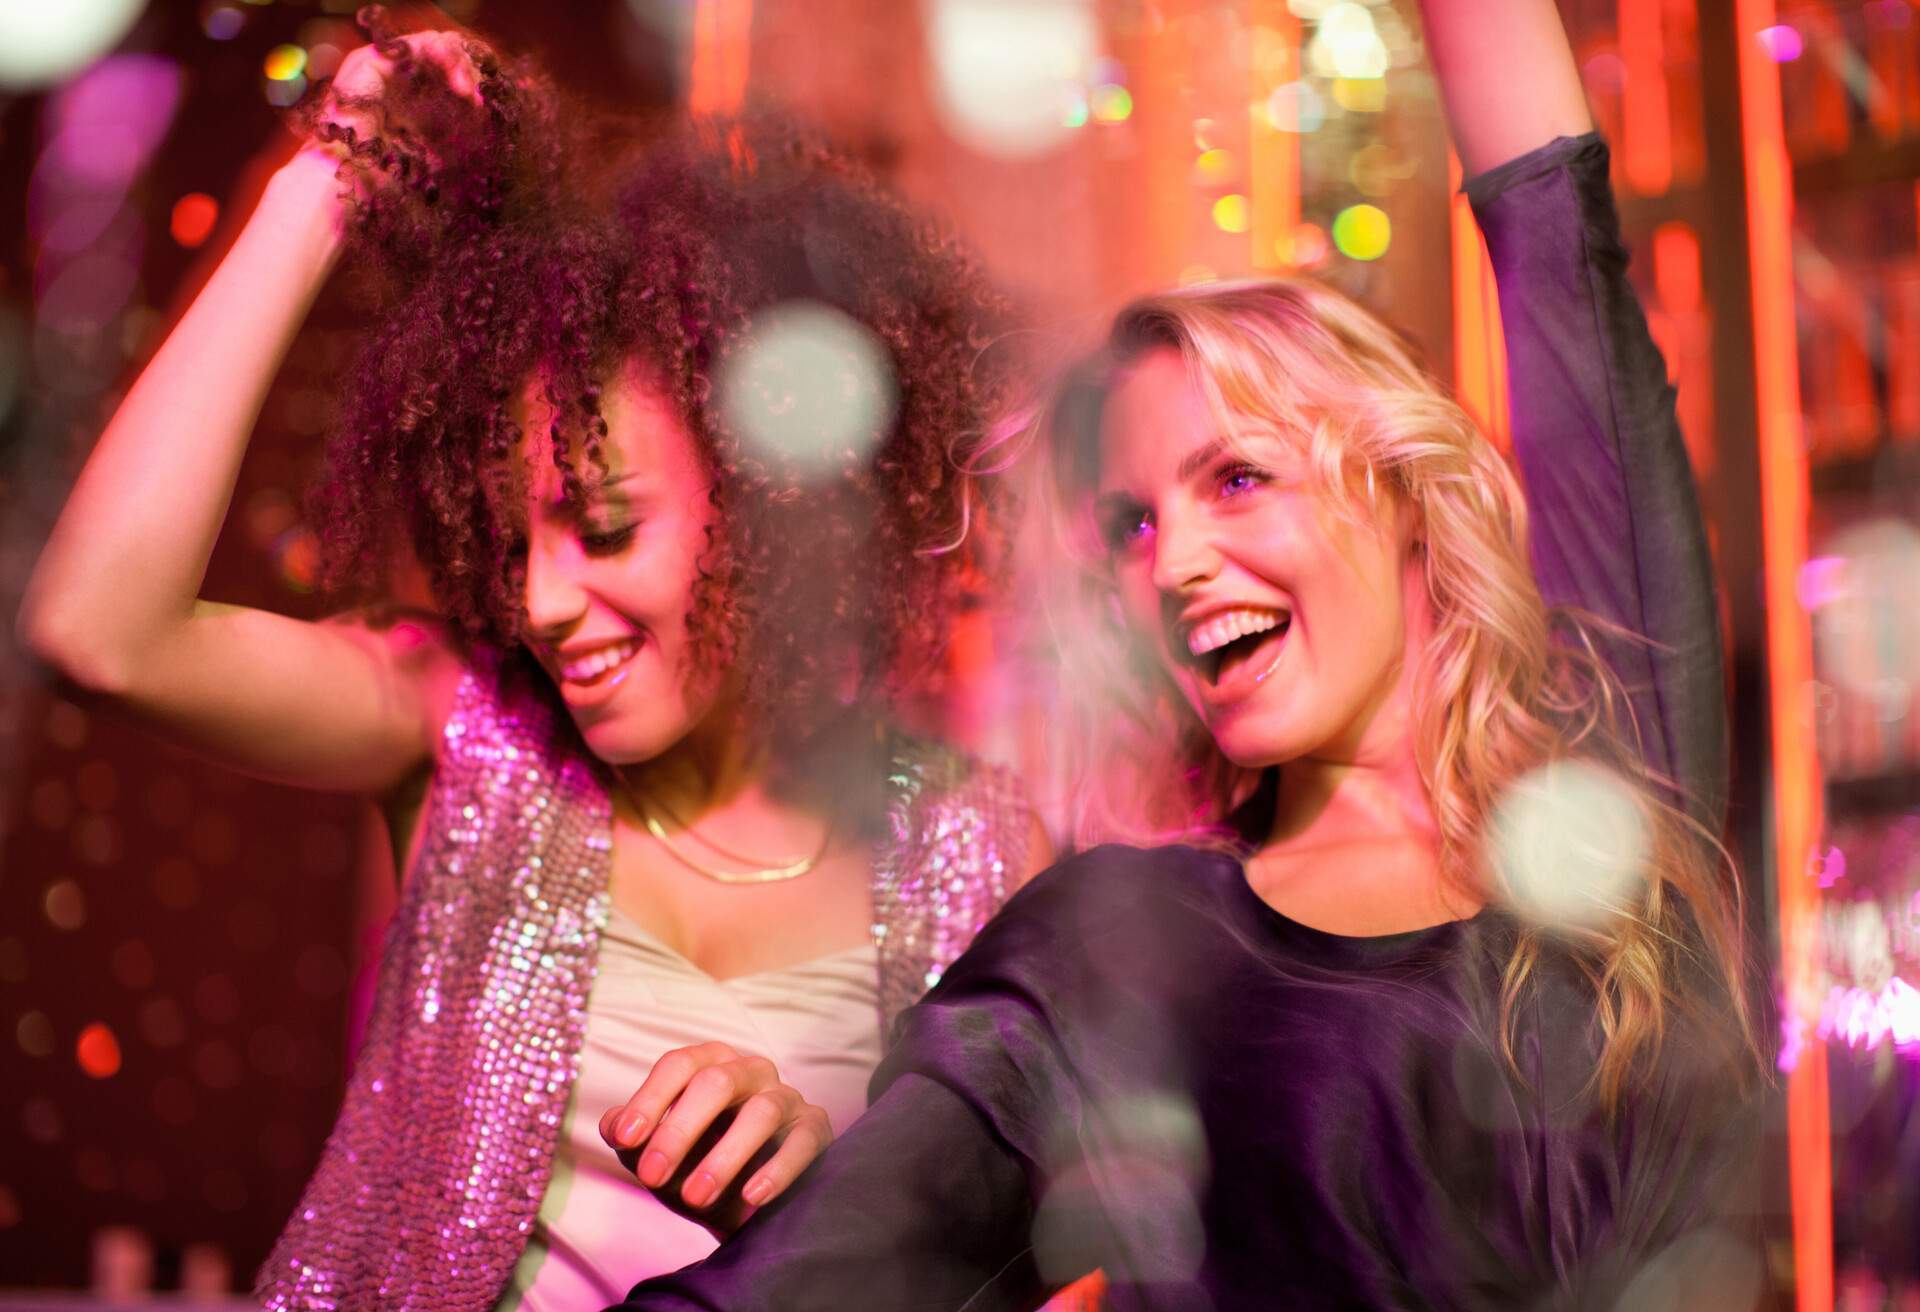 A blonde and a curly-haired woman smile while dancing and raising their hands in the air.